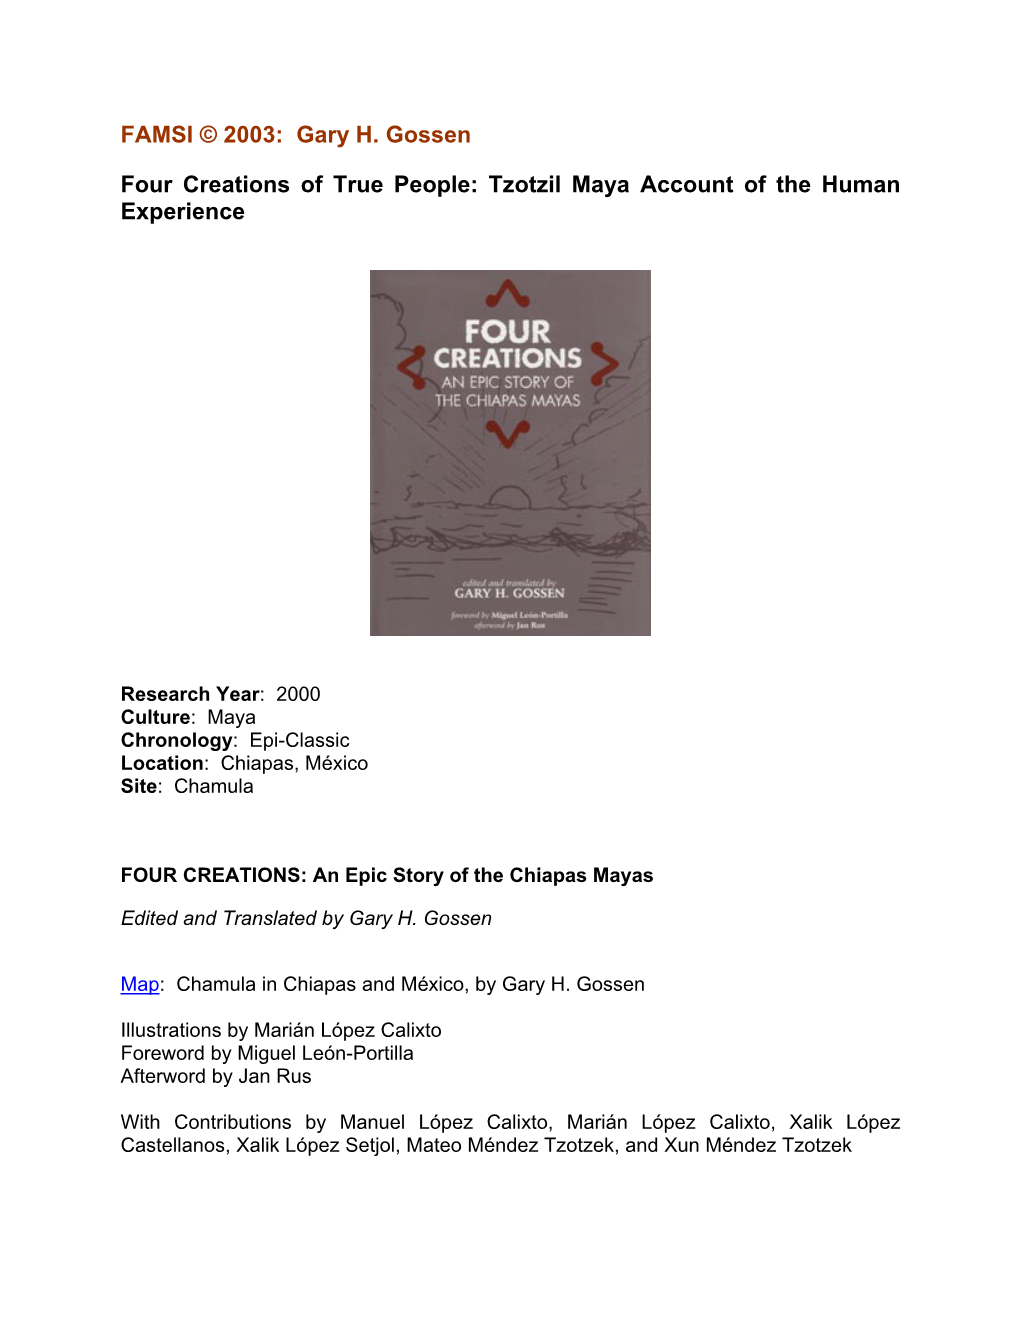 Four Creations of True People: Tzotzil Maya Account of the Human Experience